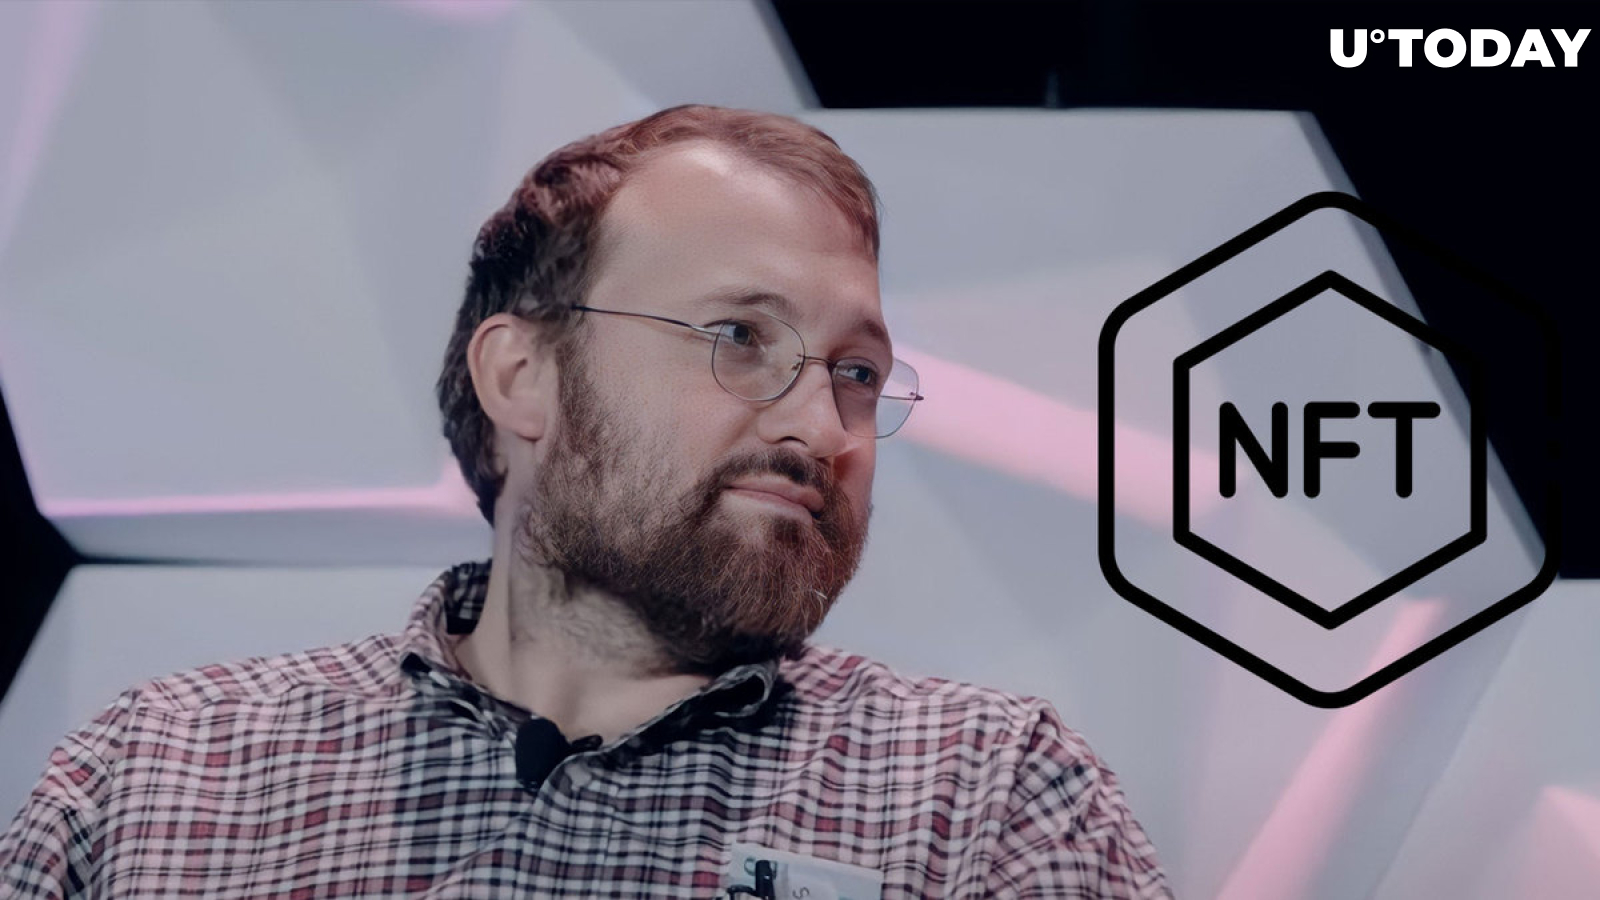 Here's Cardano Founder's Amusing Response to Recent NFT Growth